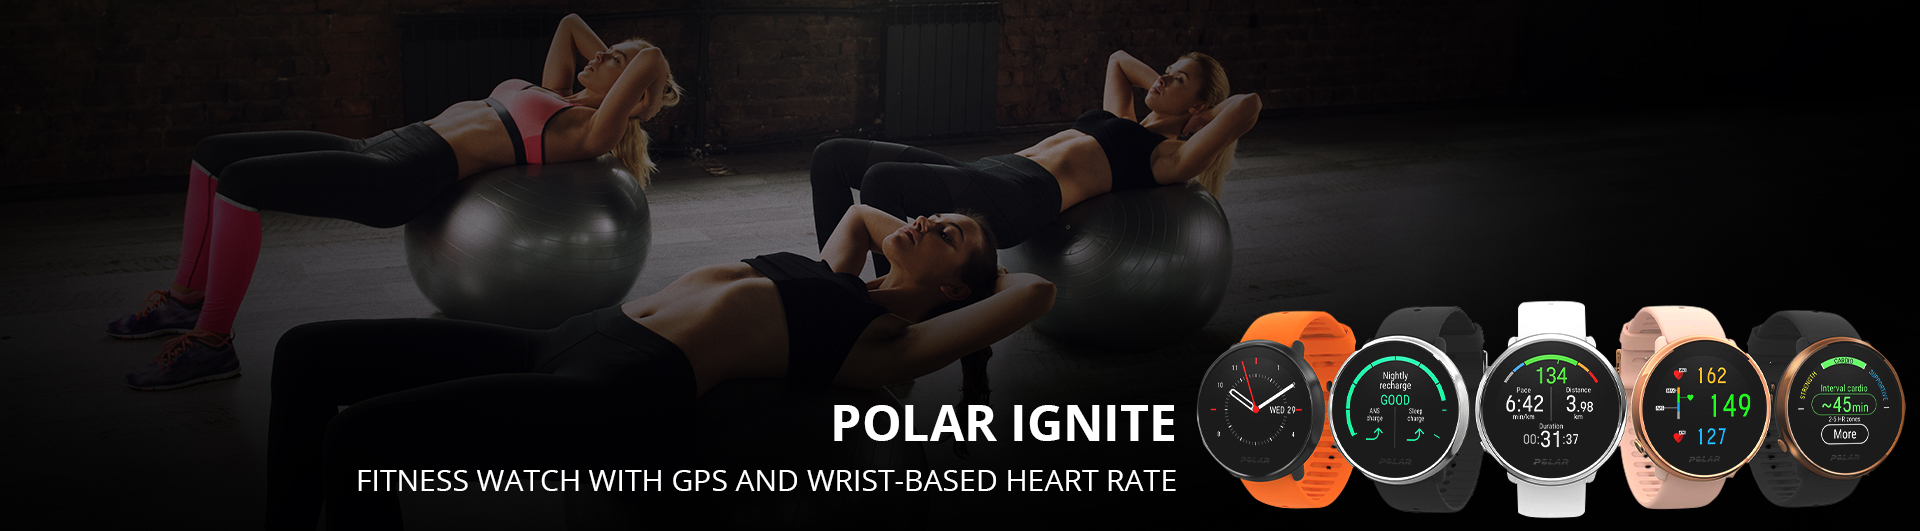 Heart Rate Monitors, activity trackers & fitness watches